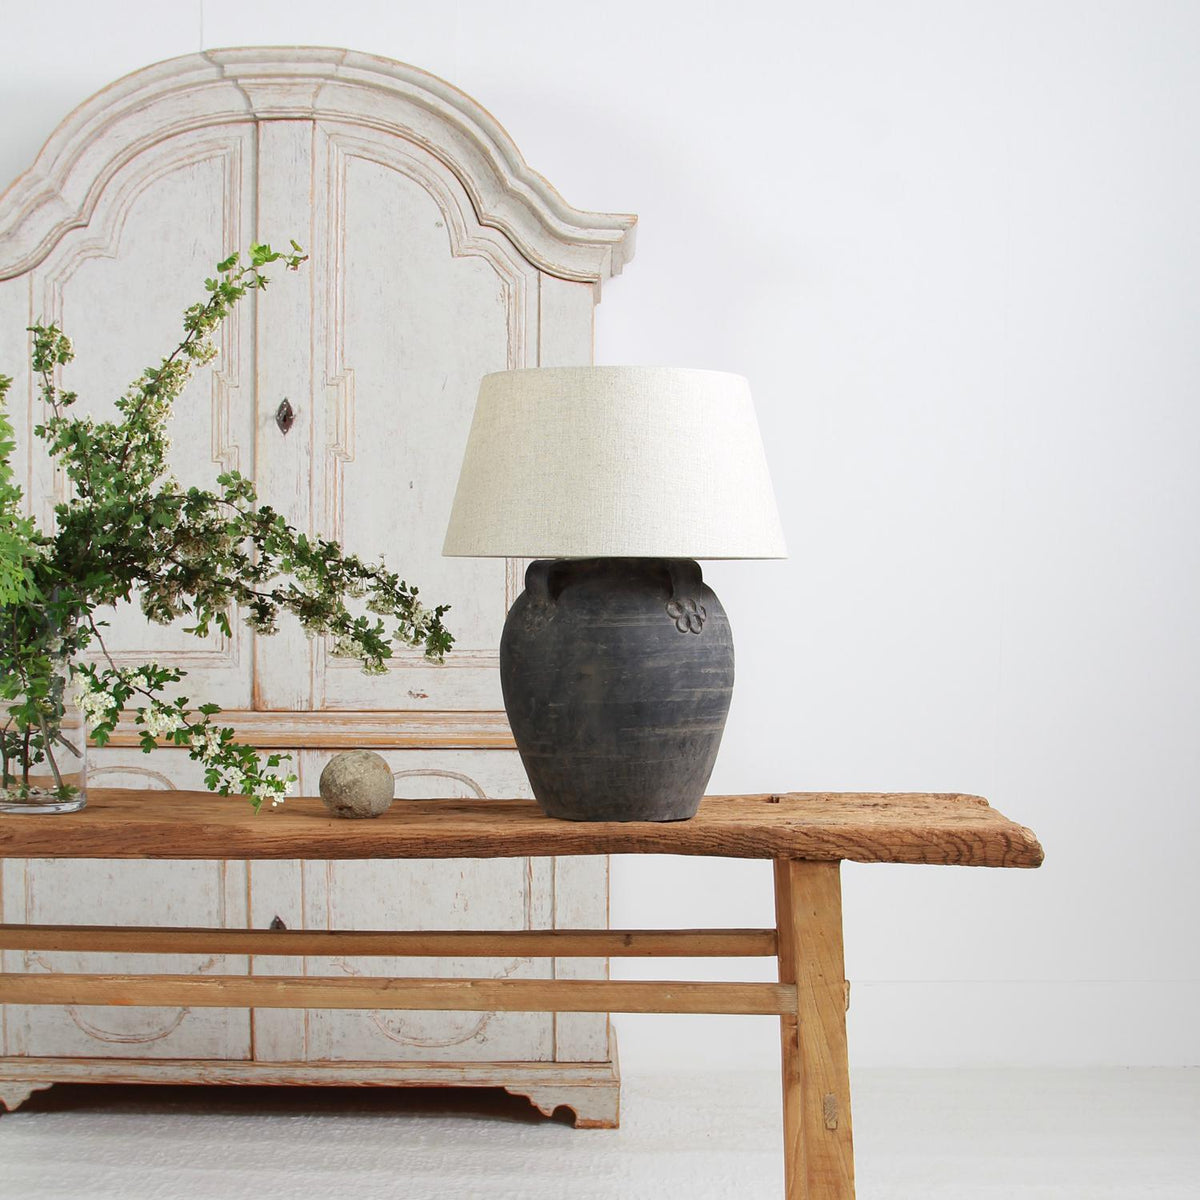 AUTHENTIC CERAMIC TABLE LAMP WITH NATURAL LINEN DRUM SHADE